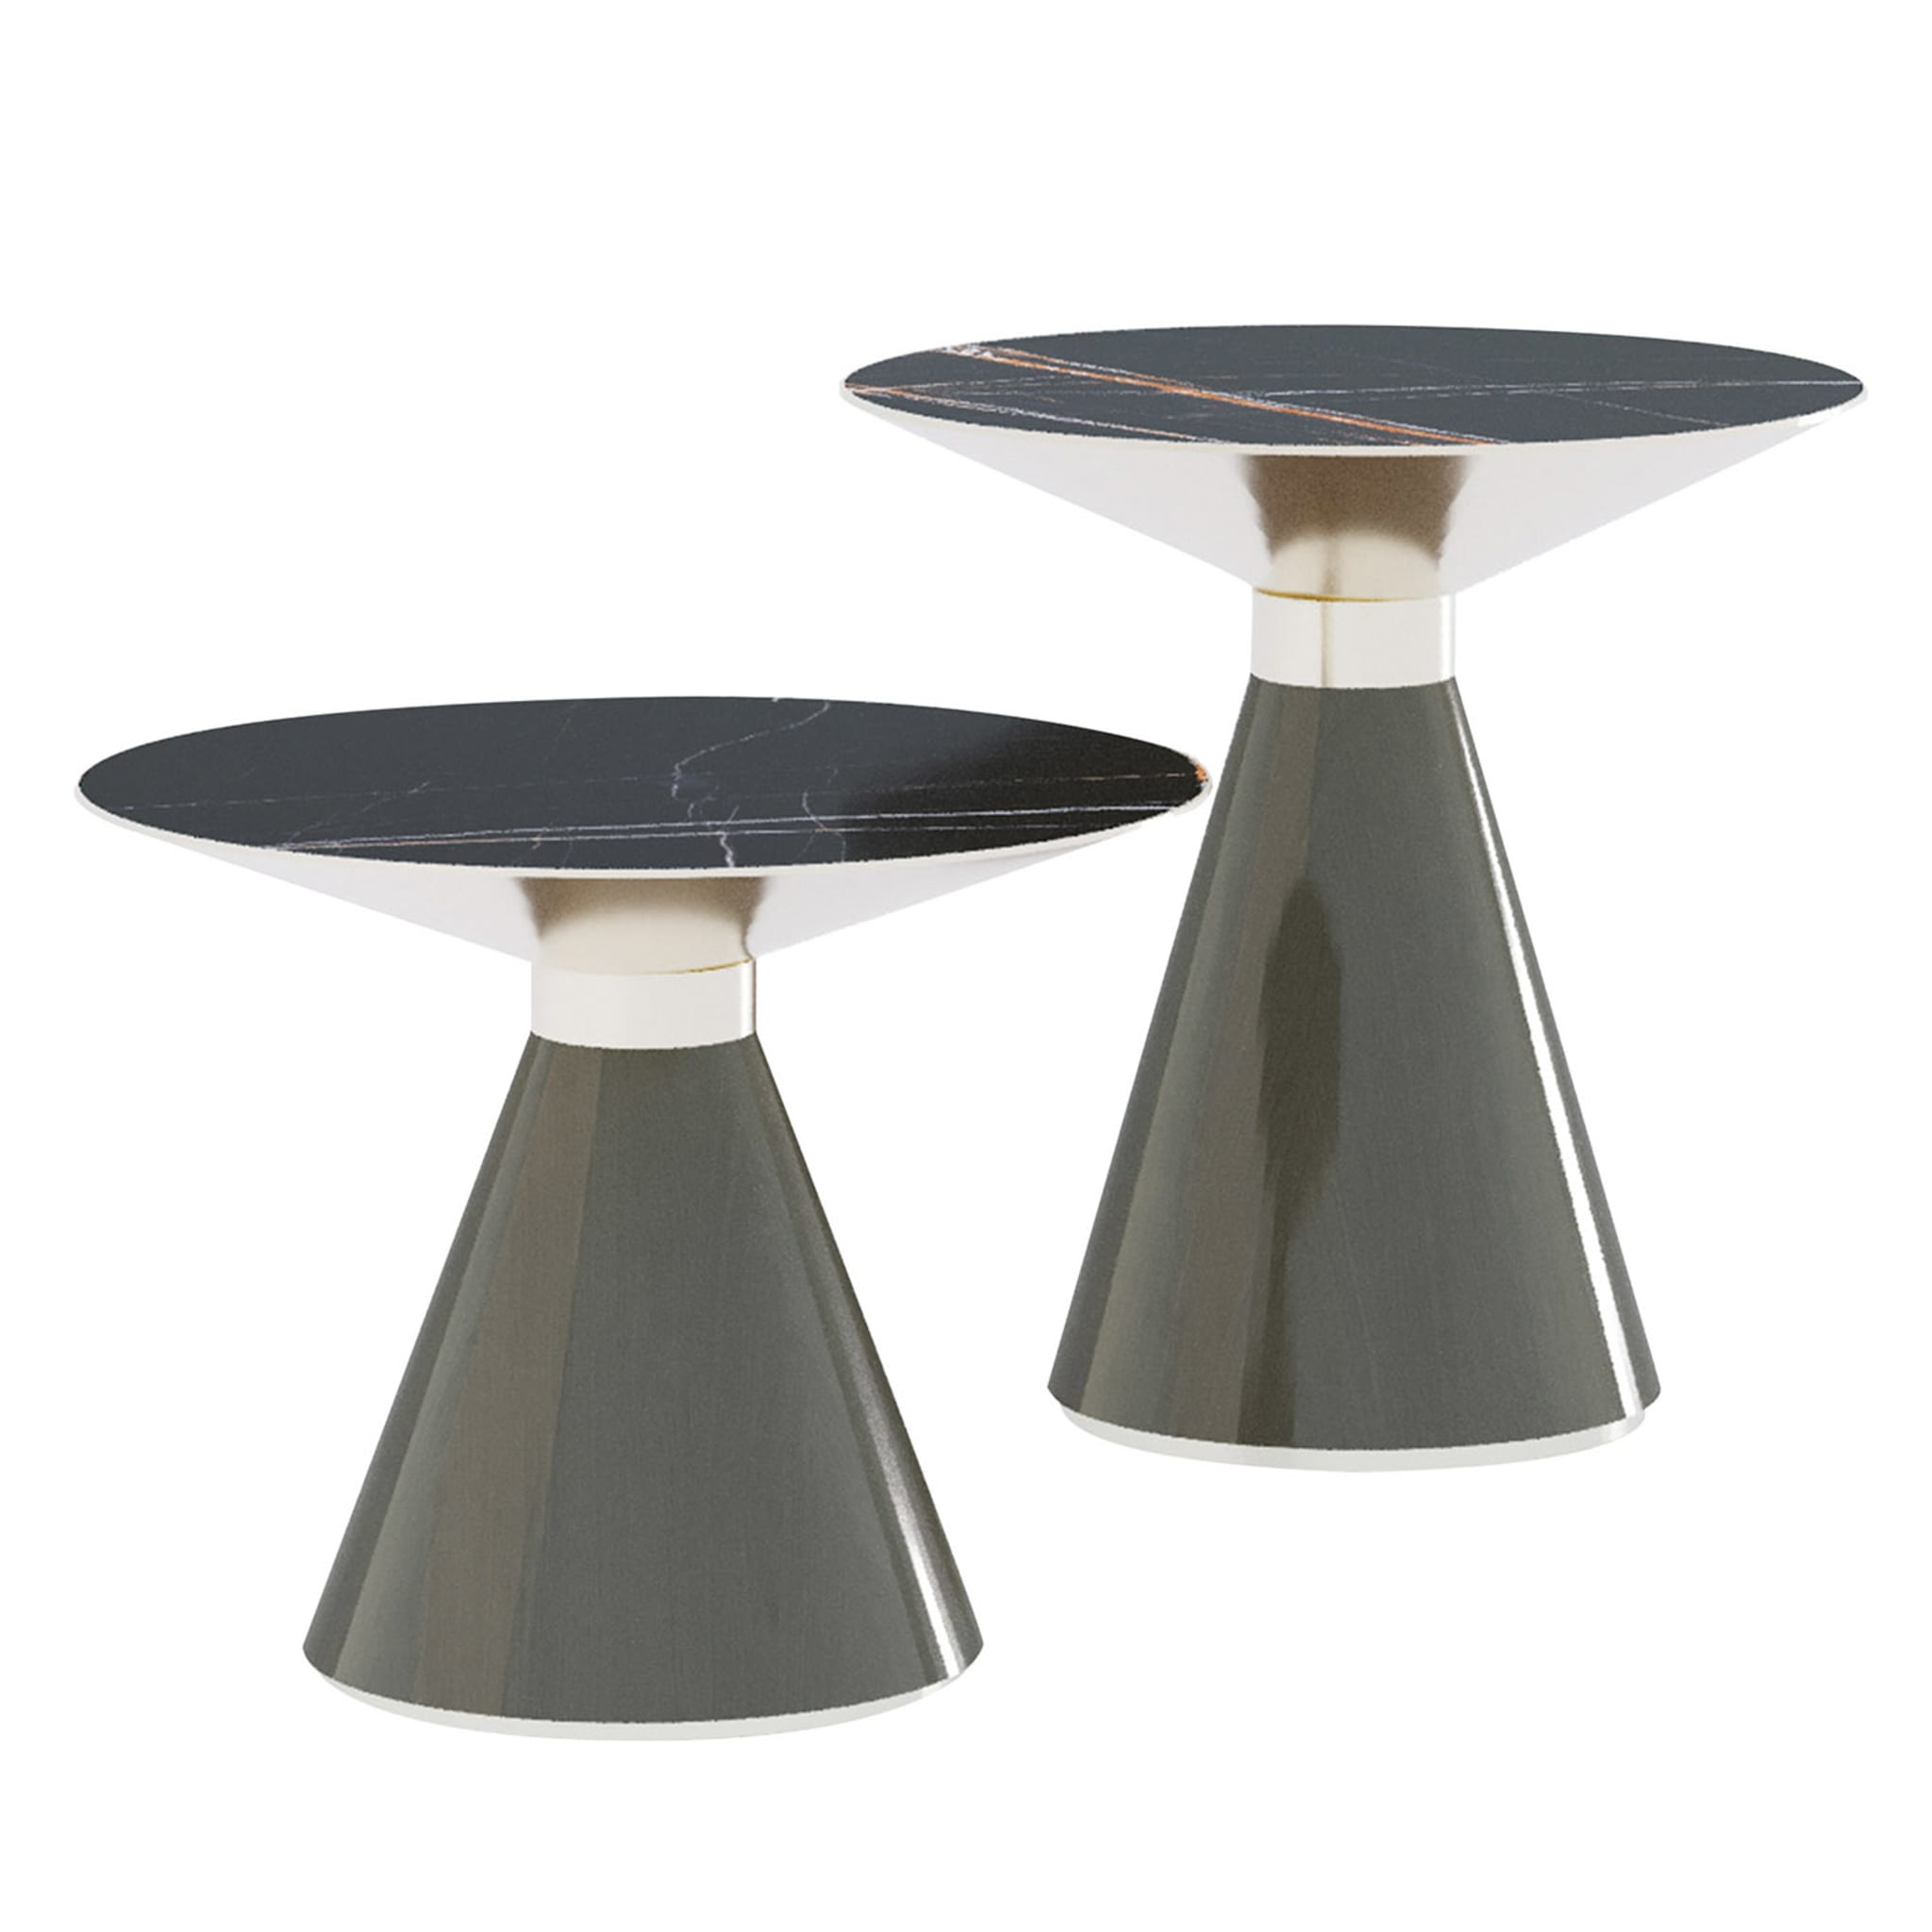 Set of 2 Crono Side Tables - Main view